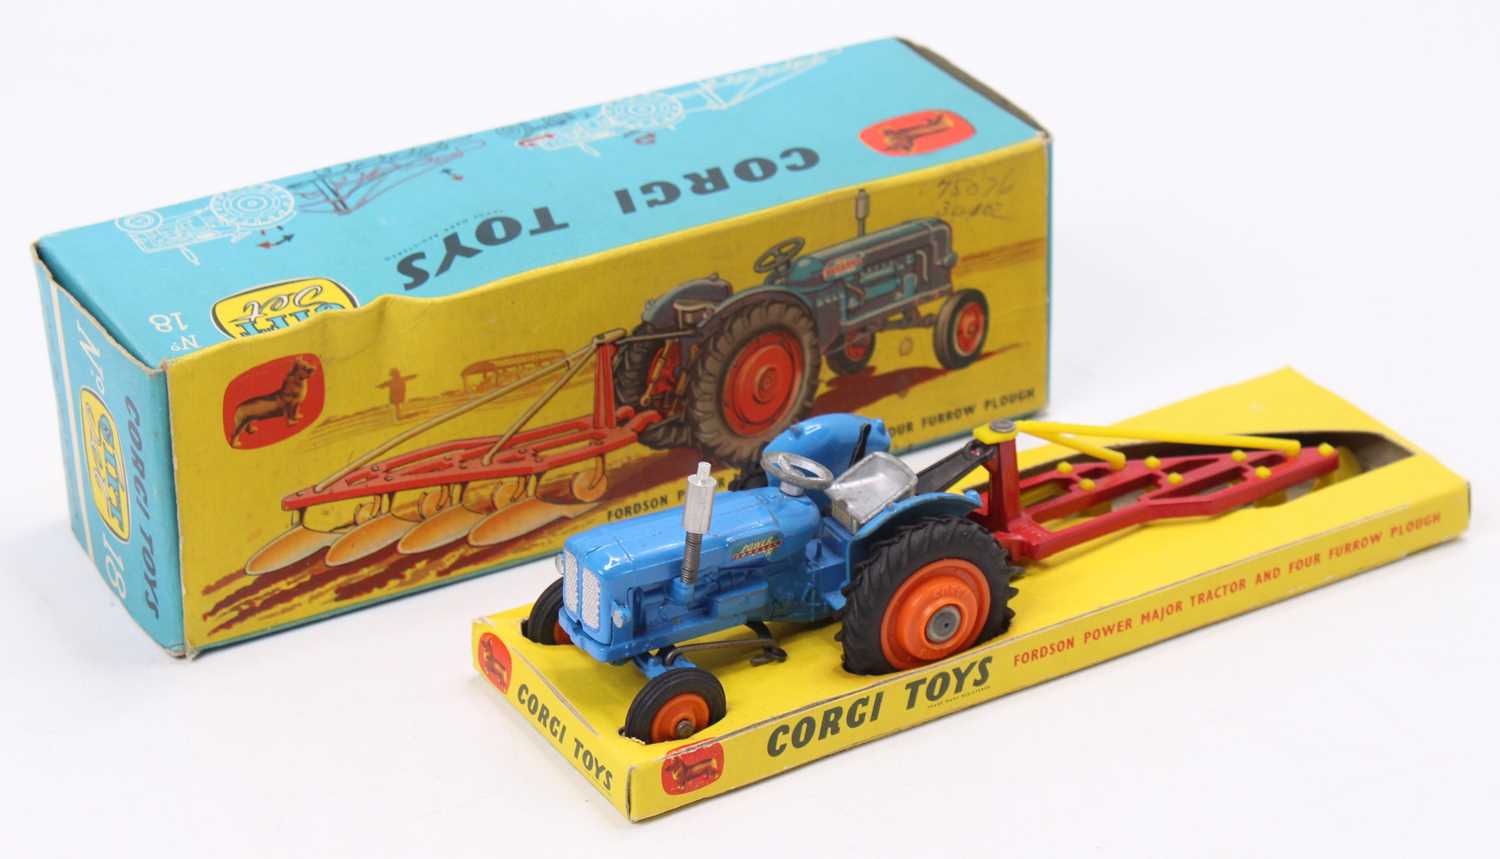 Corgi Toys Gift Set 18 Ford Tractor and plough set, comprising of a 55 Fordson Power Major Tractor